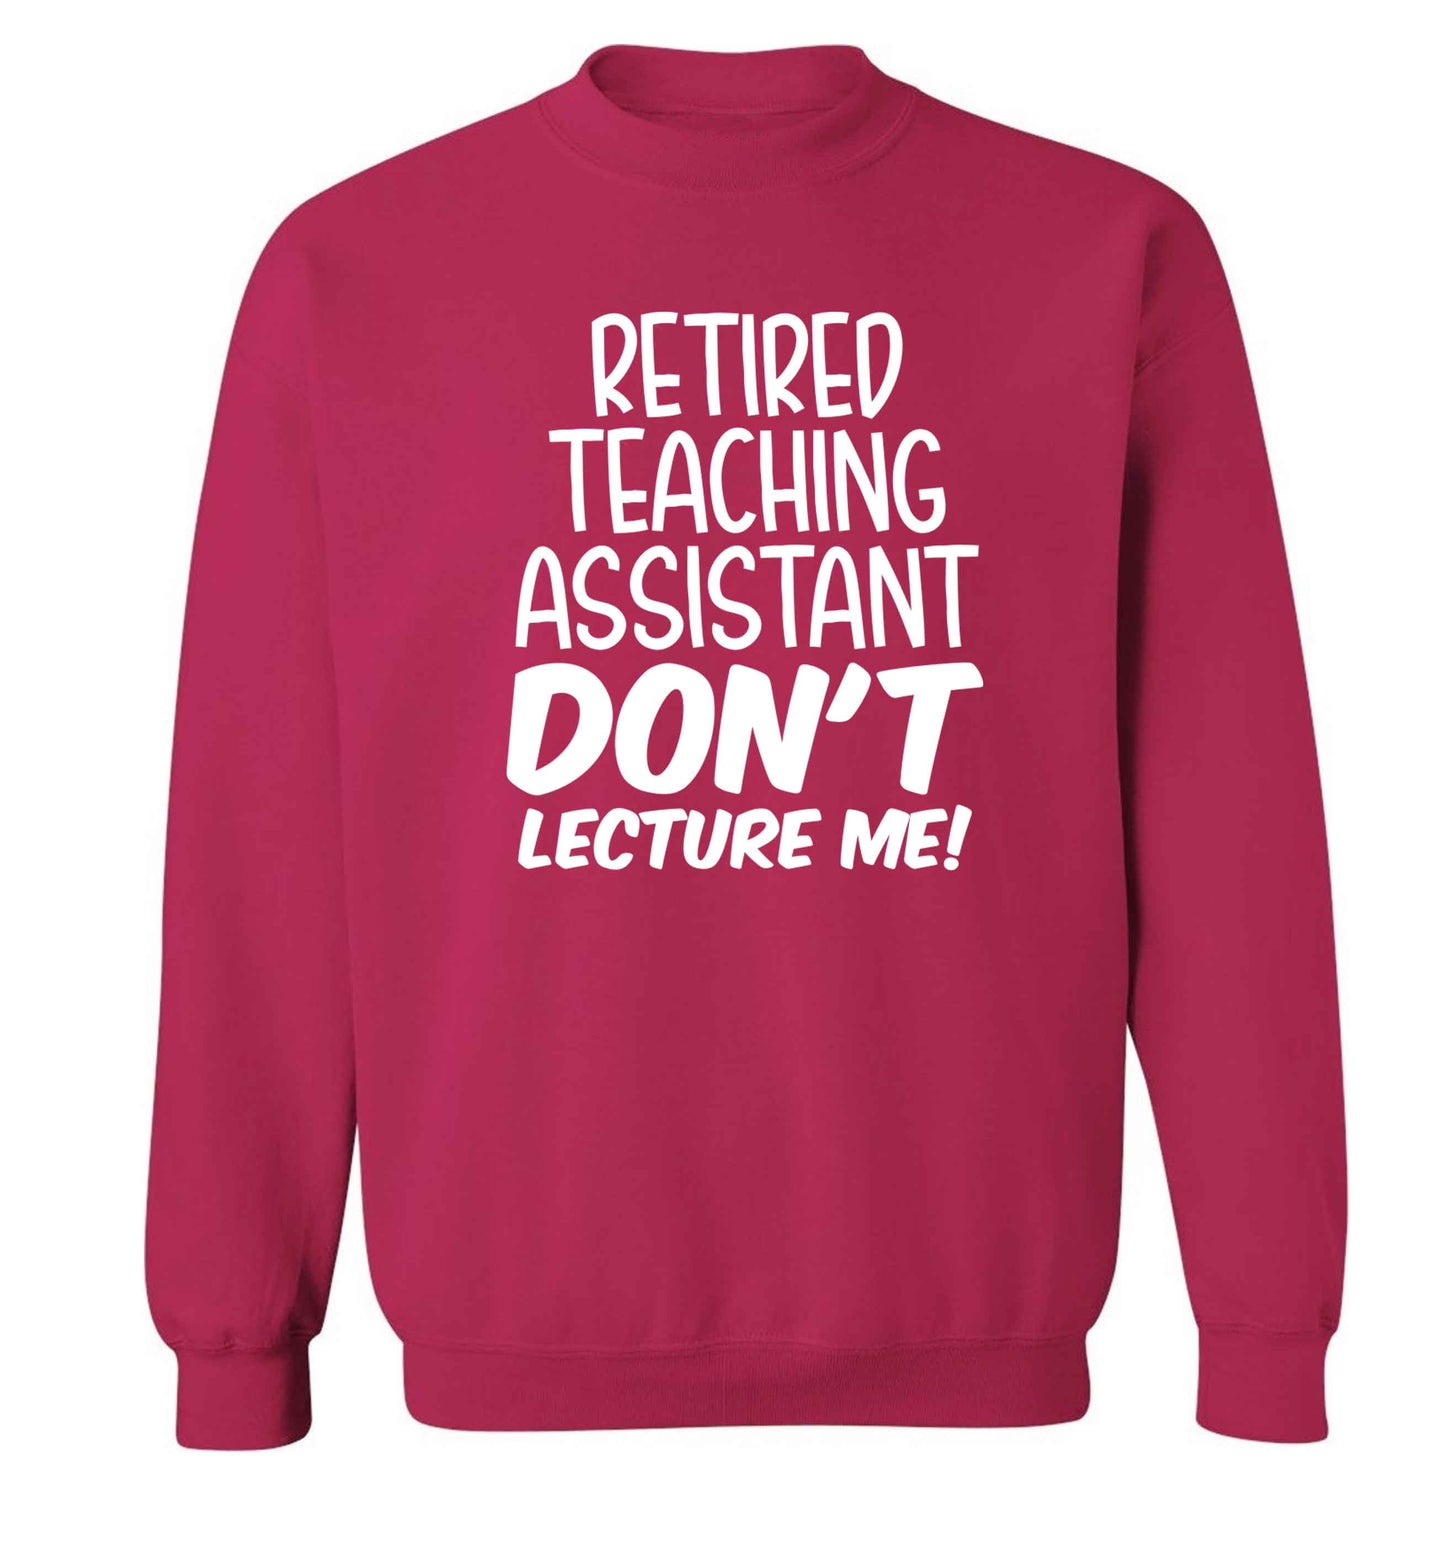 Retired teaching assistant don't lecture me Adult's unisex pink Sweater 2XL